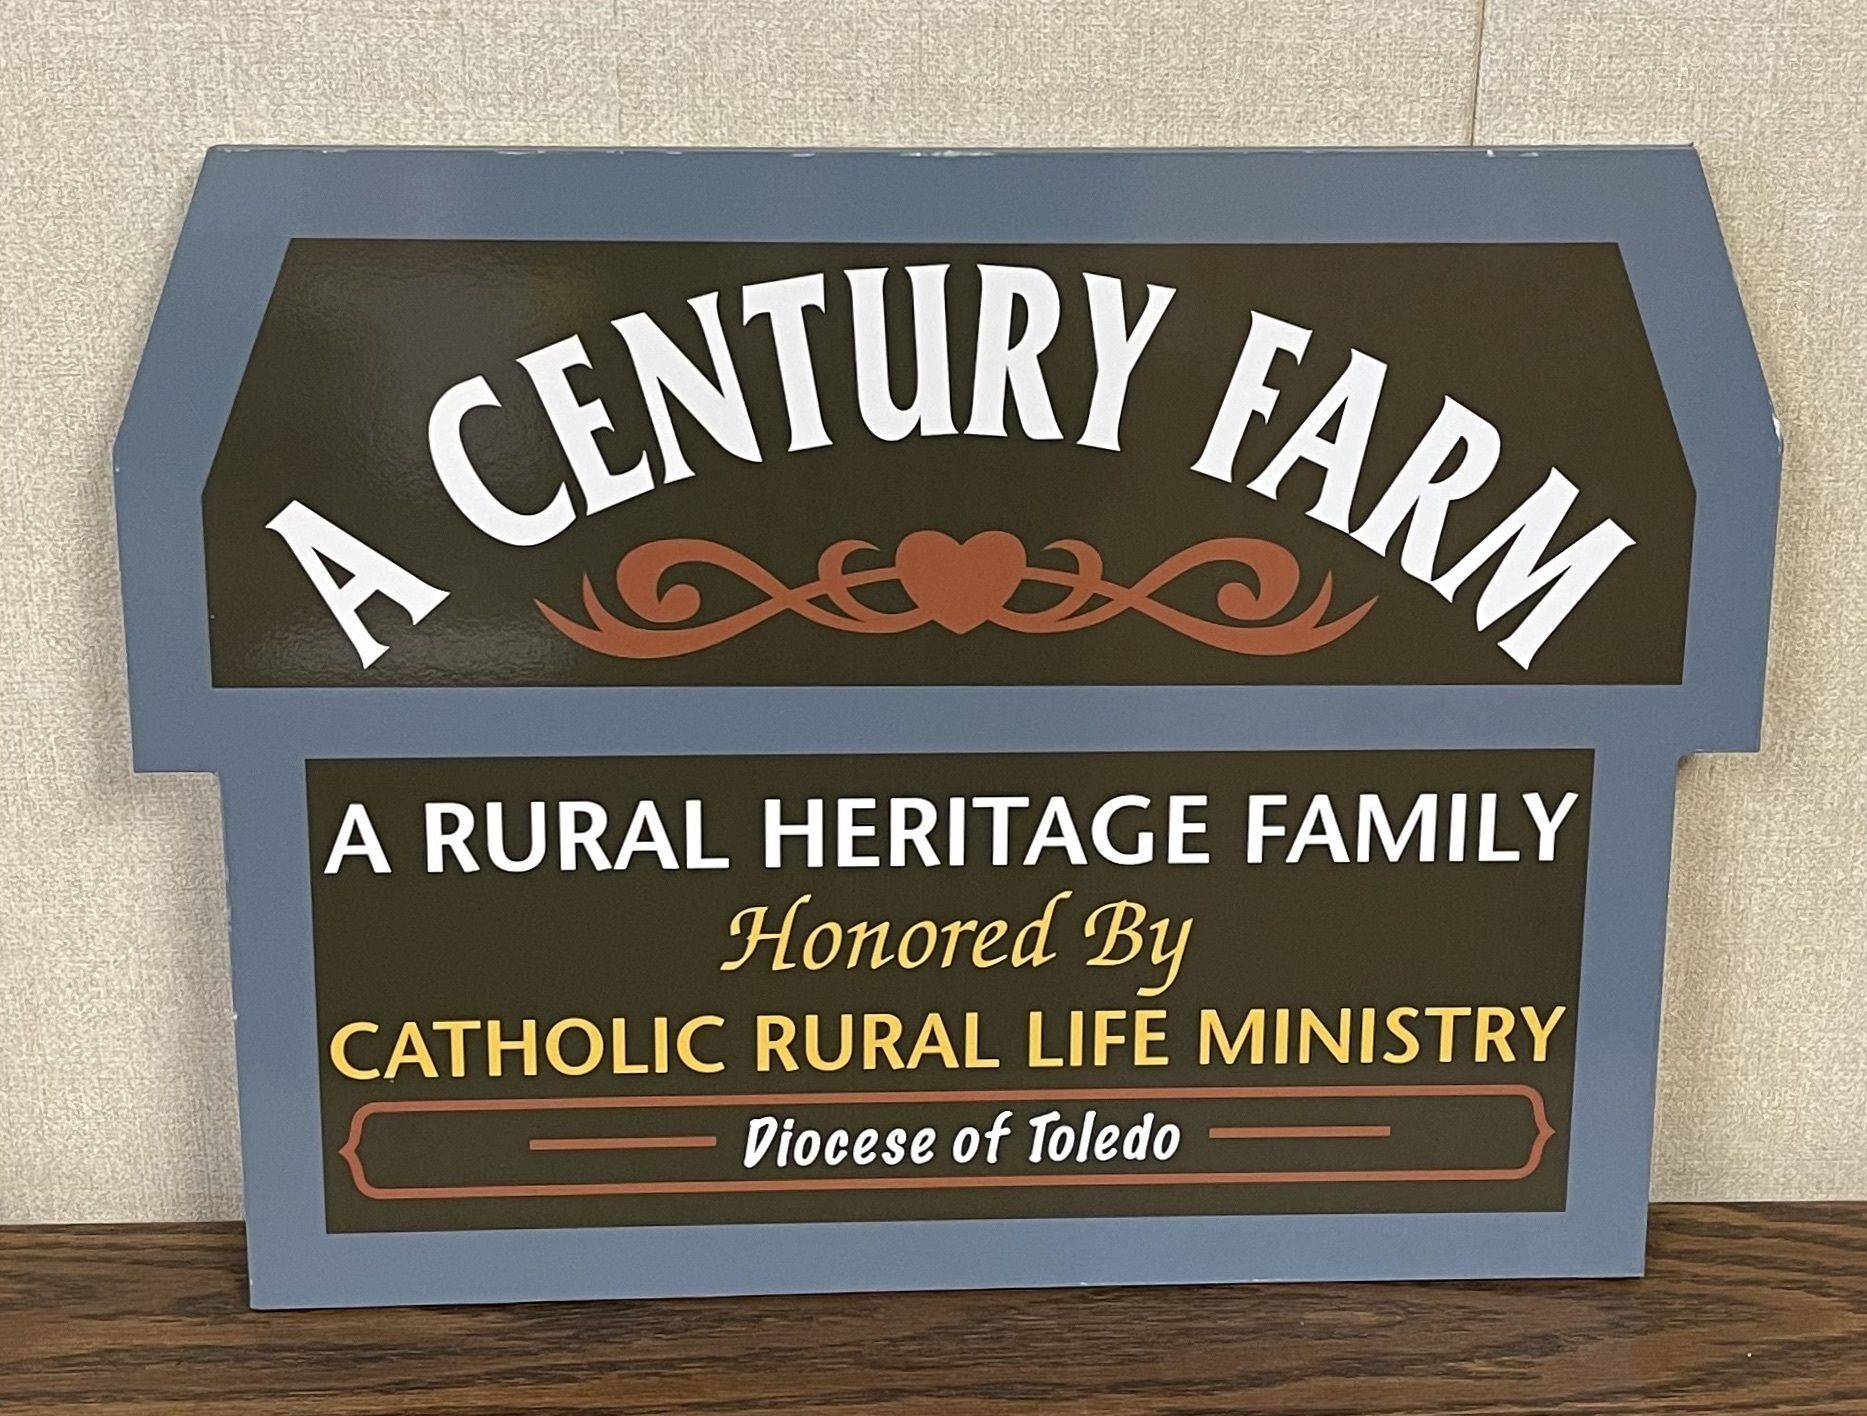 Catholic Charities Diocese of Toledo's Rural Life Ministries Committee oversees this legacy farm award program.